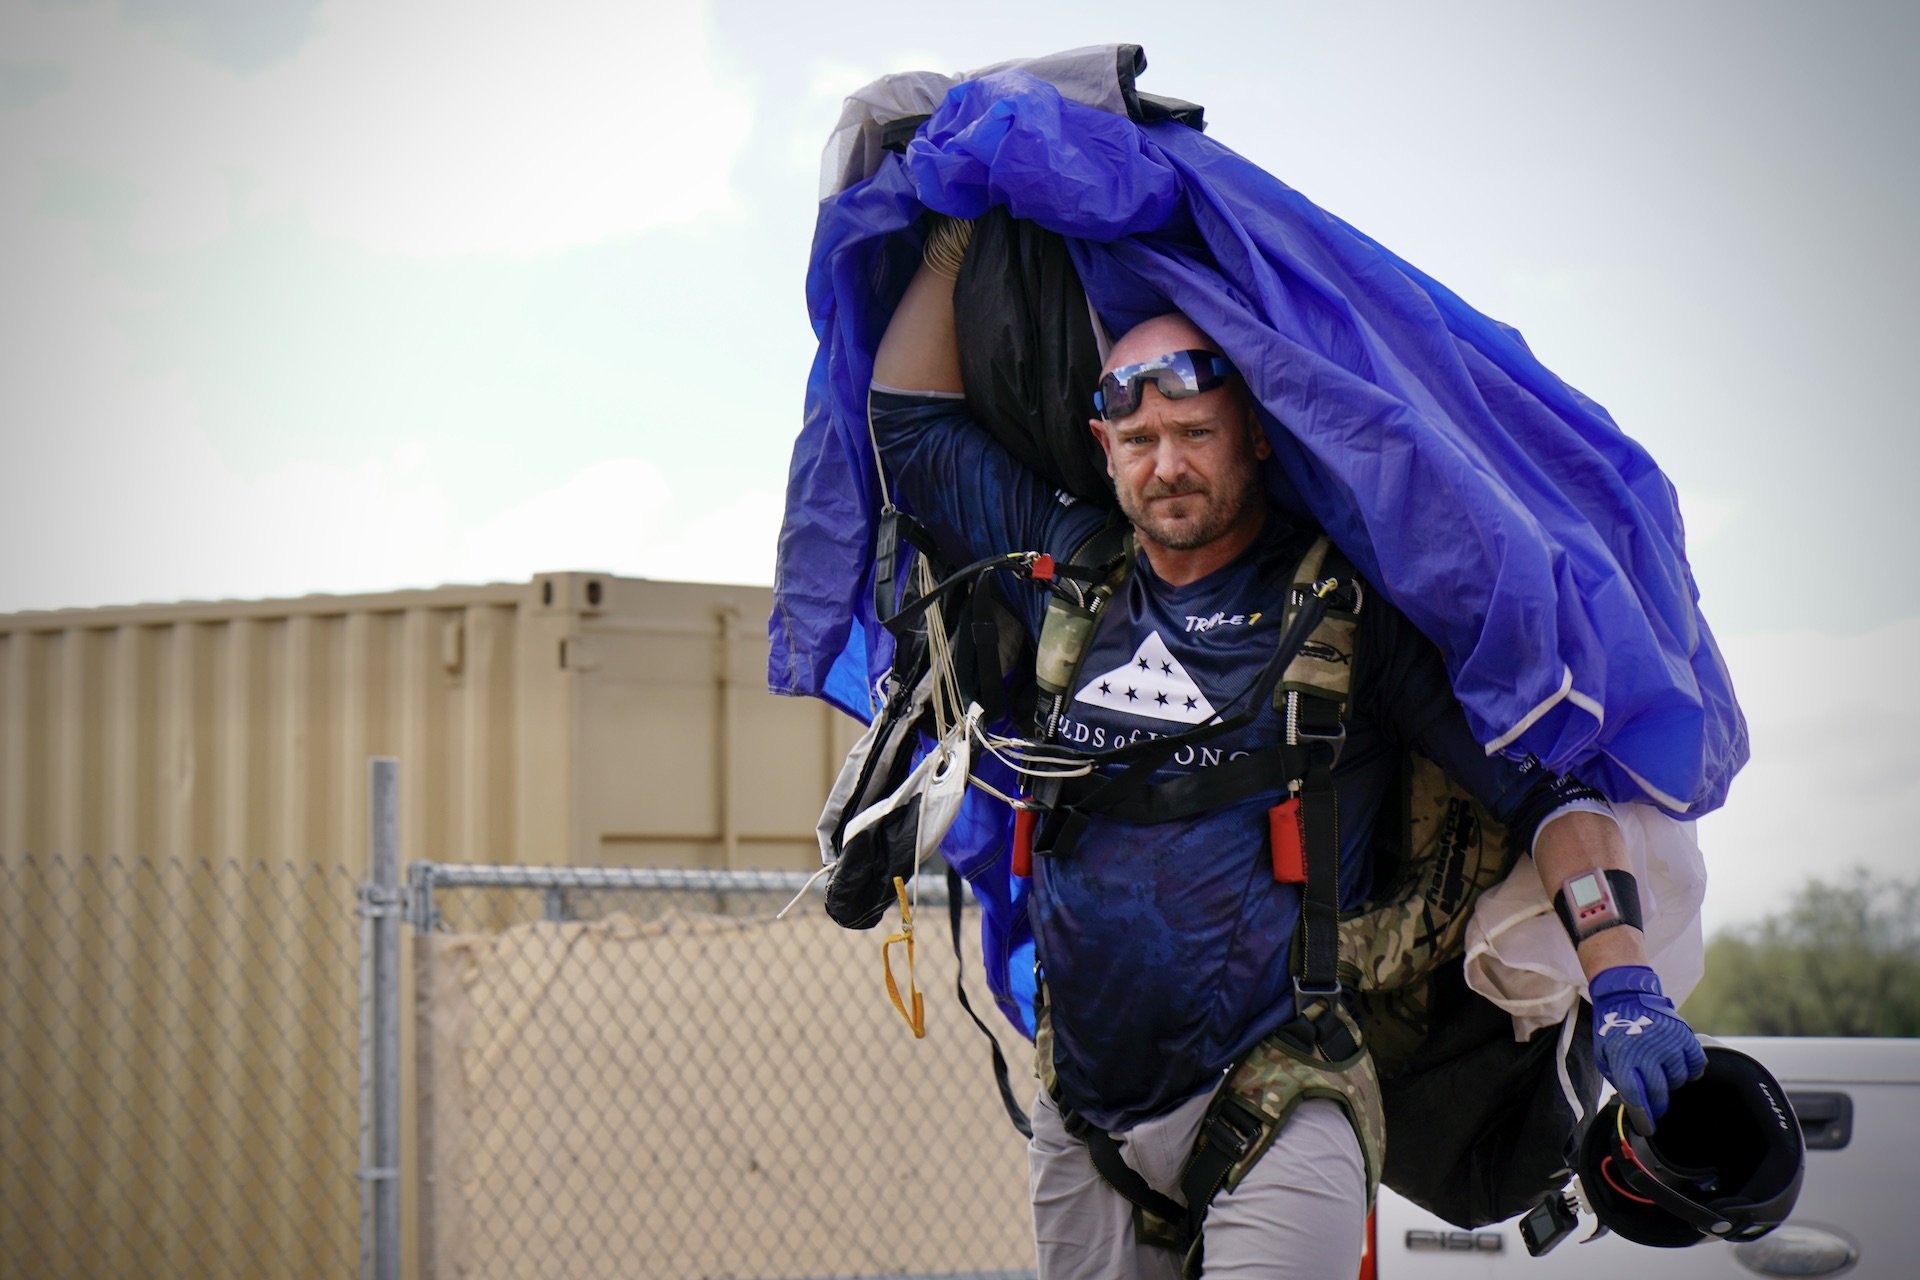 Triple 7 team skydiving record: Mike Sarraille